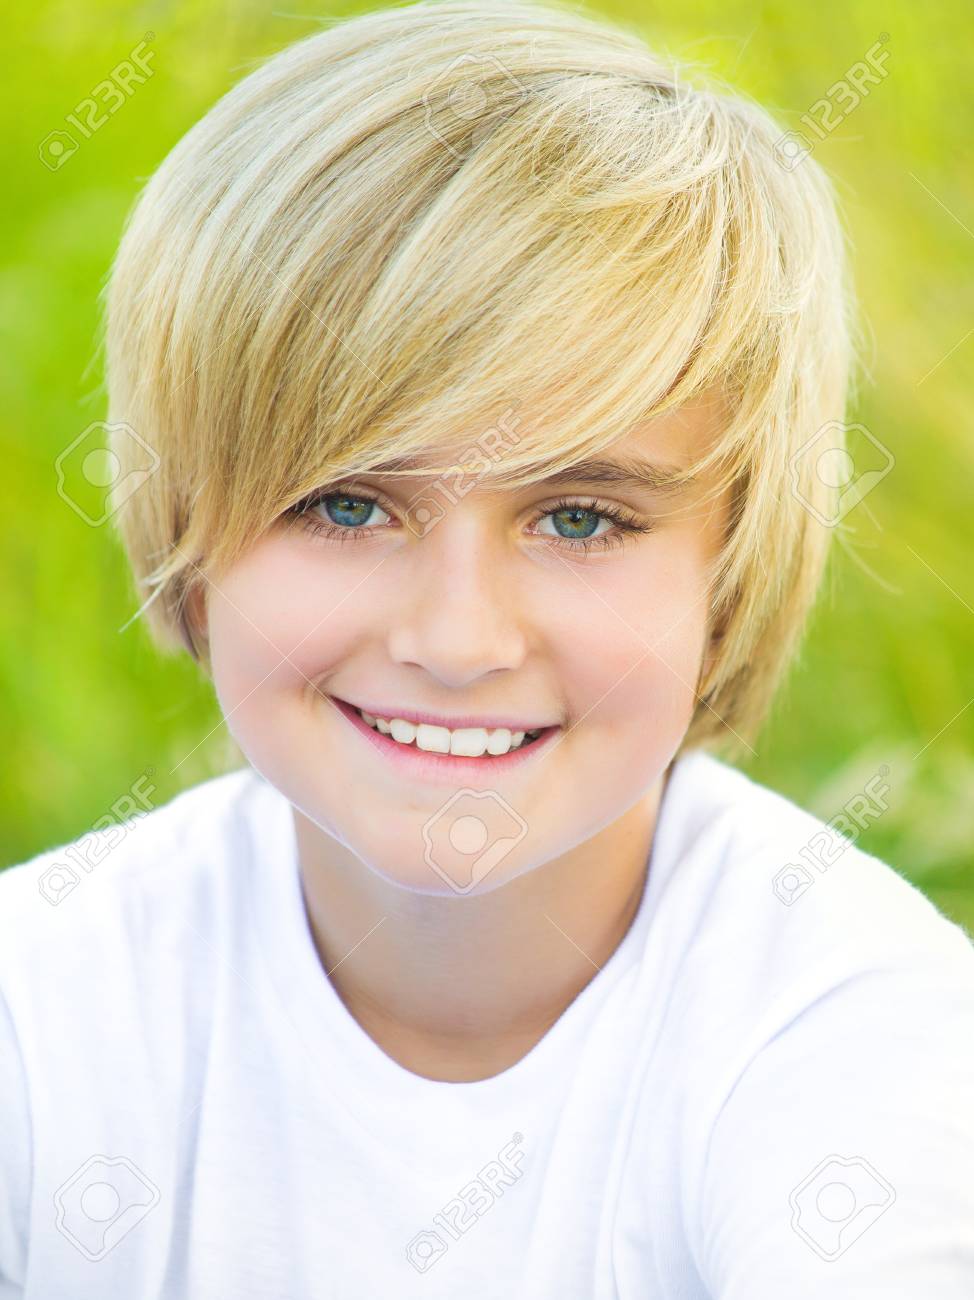 Portrait of fair-haired boy looking at camera outdoors Stock Photo -  74262231